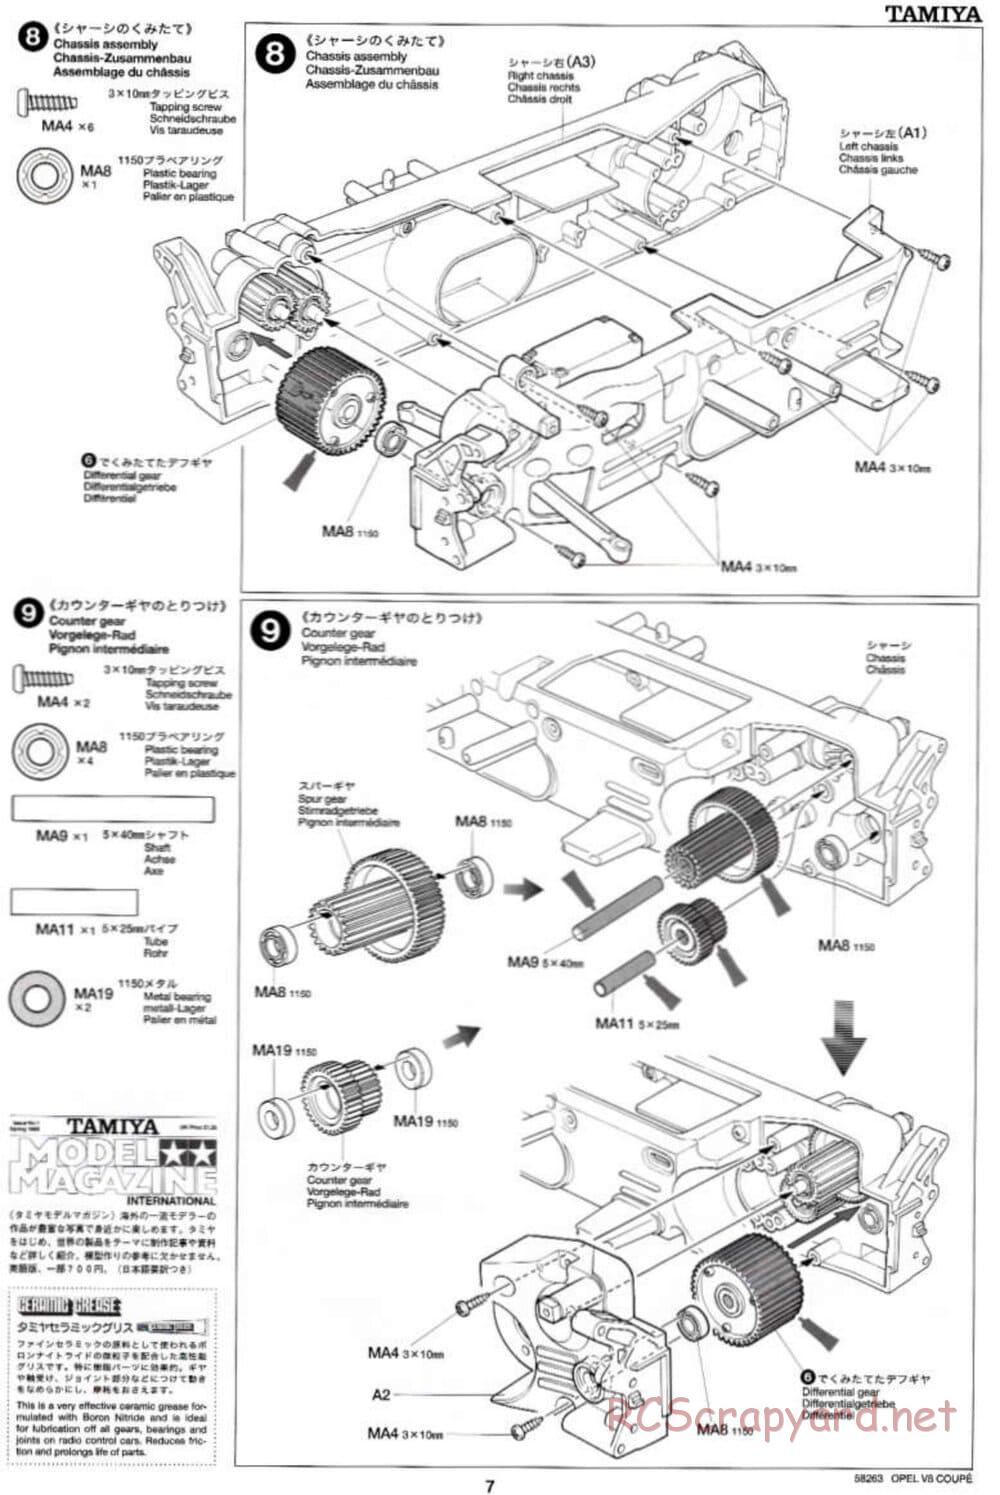 Tamiya - Opel V8 Coupe - TL-01 Chassis - Manual - Page 7